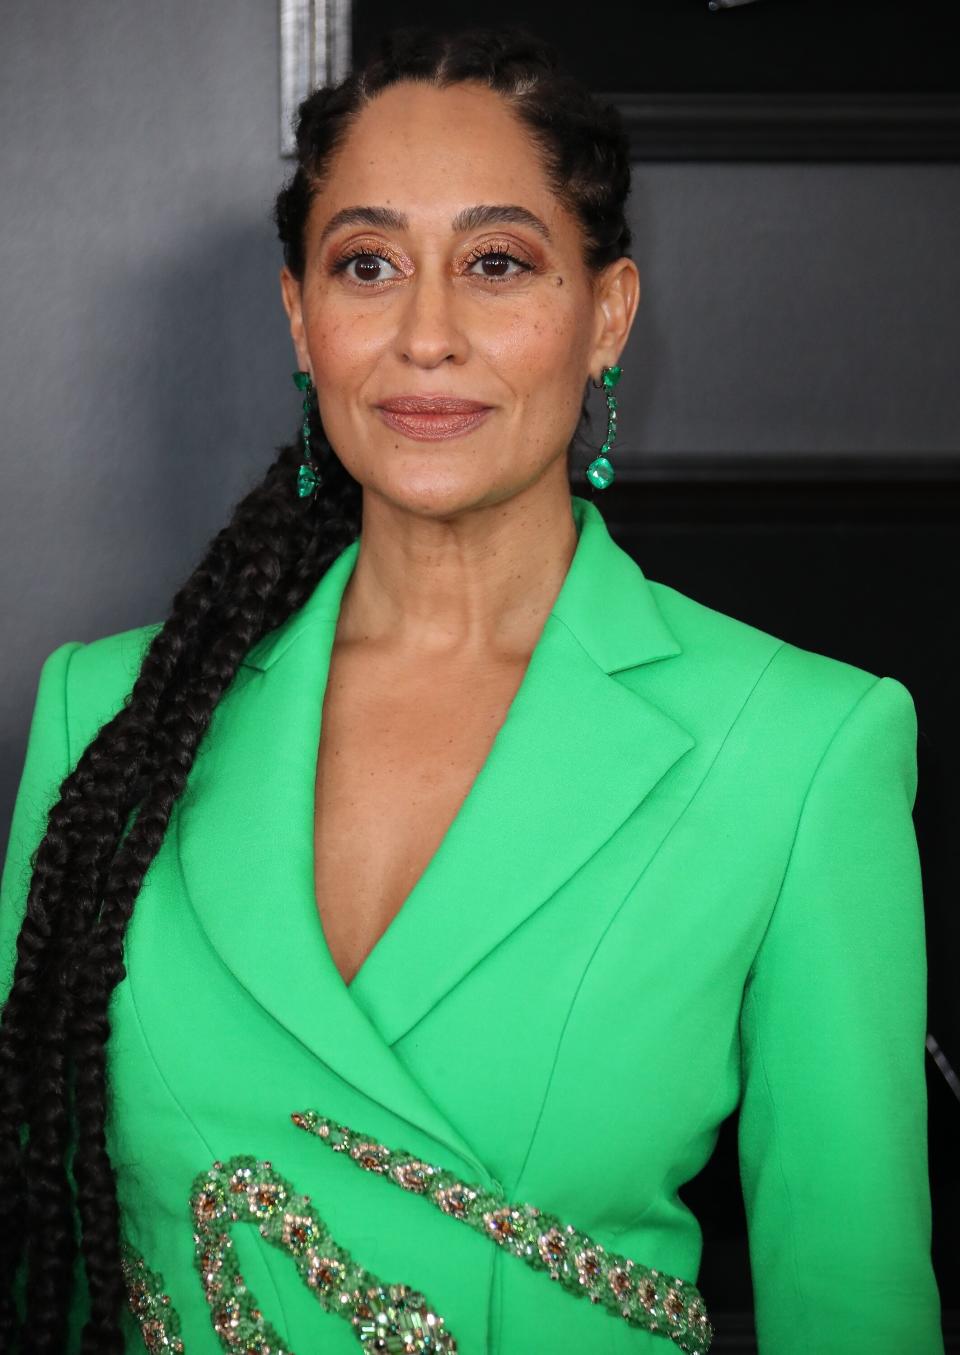 Tracee Ellis Ross at the Grammys in Los Angeles on Feb. 10. Makeup by ﻿<a href="https://www.instagram.com/p/BtuU9ayn-6S/" target="_blank" rel="noopener noreferrer">Lisa Storey</a> using Pat McGrath products. Hair by <a href="https://www.instagram.com/p/BtunnH_l6d4/" target="_blank" rel="noopener noreferrer">Araxi Lindsey</a>.